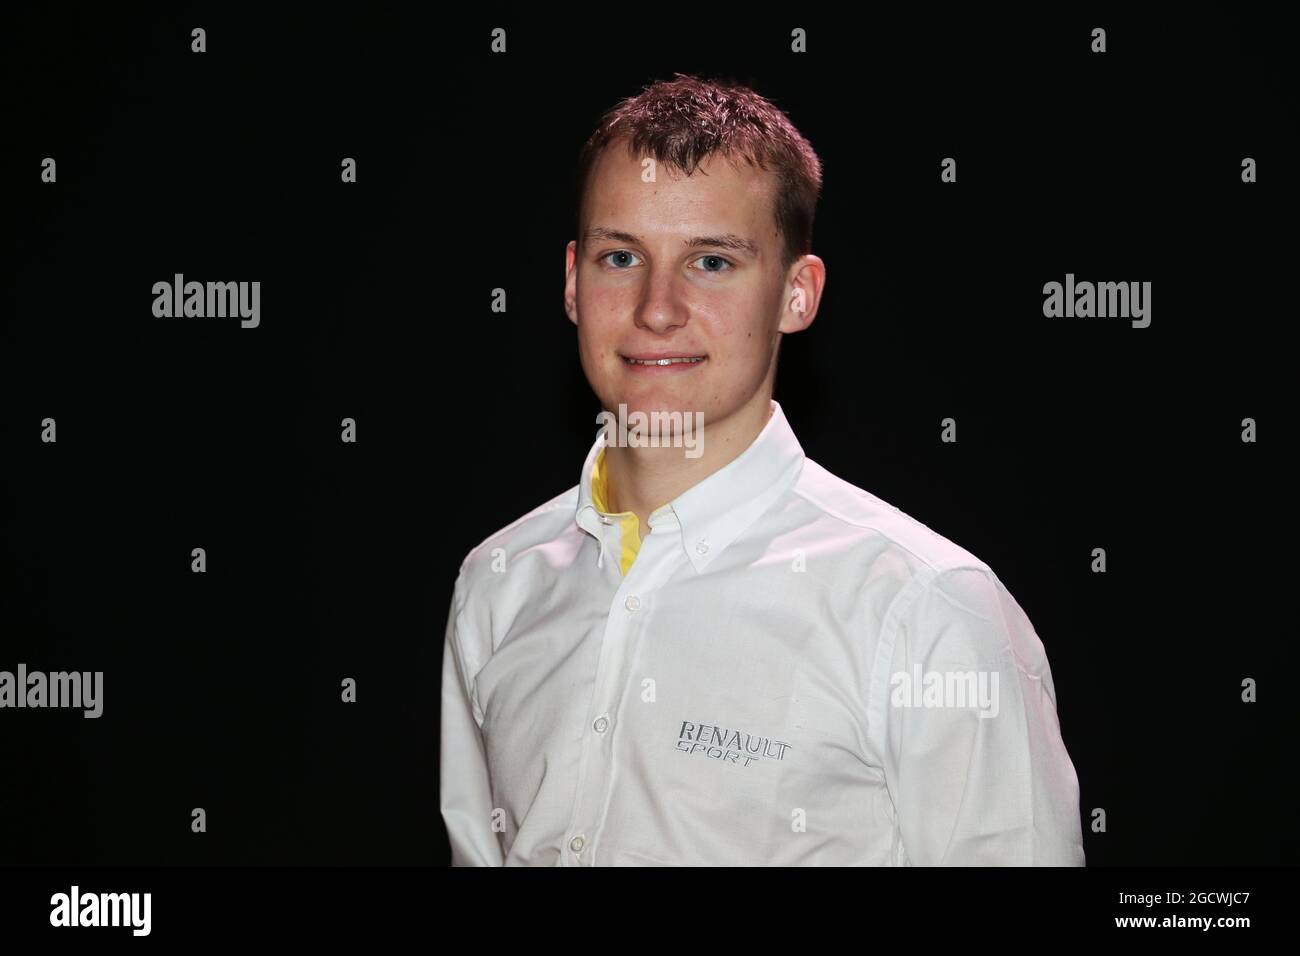 Kevin Joerg (SUI) Renault Sport Academy Driver. Renault Sport Formula One Team RS16 Launch, Renault Technocentre, Paris, France. Wednesday 3rd February 2016. Stock Photo